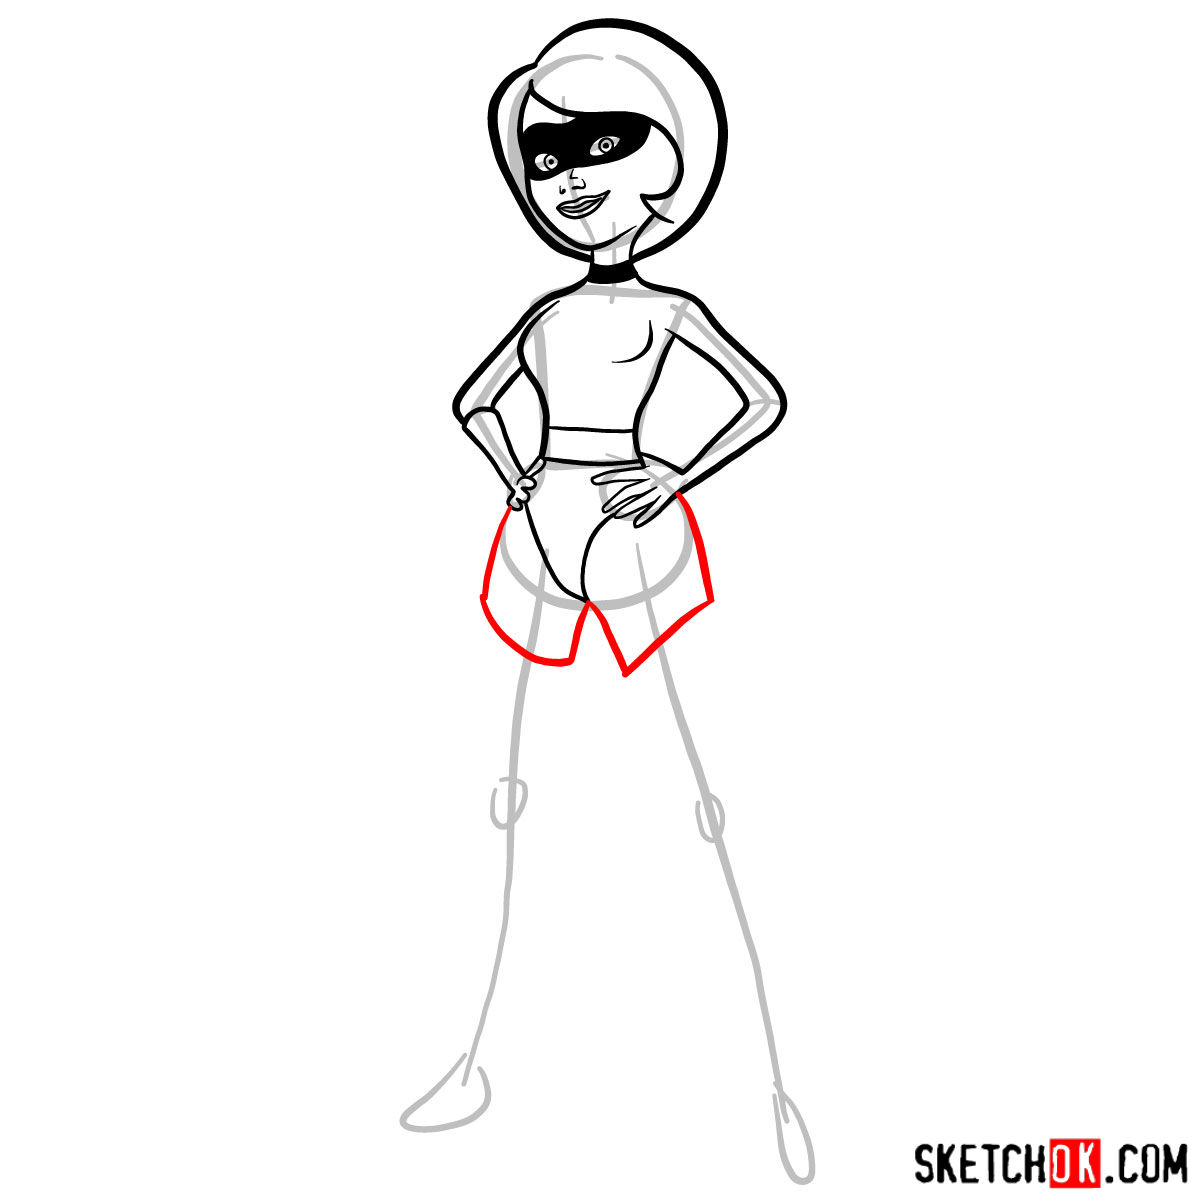 How to draw Elastigirl from The Incredibles - step 09